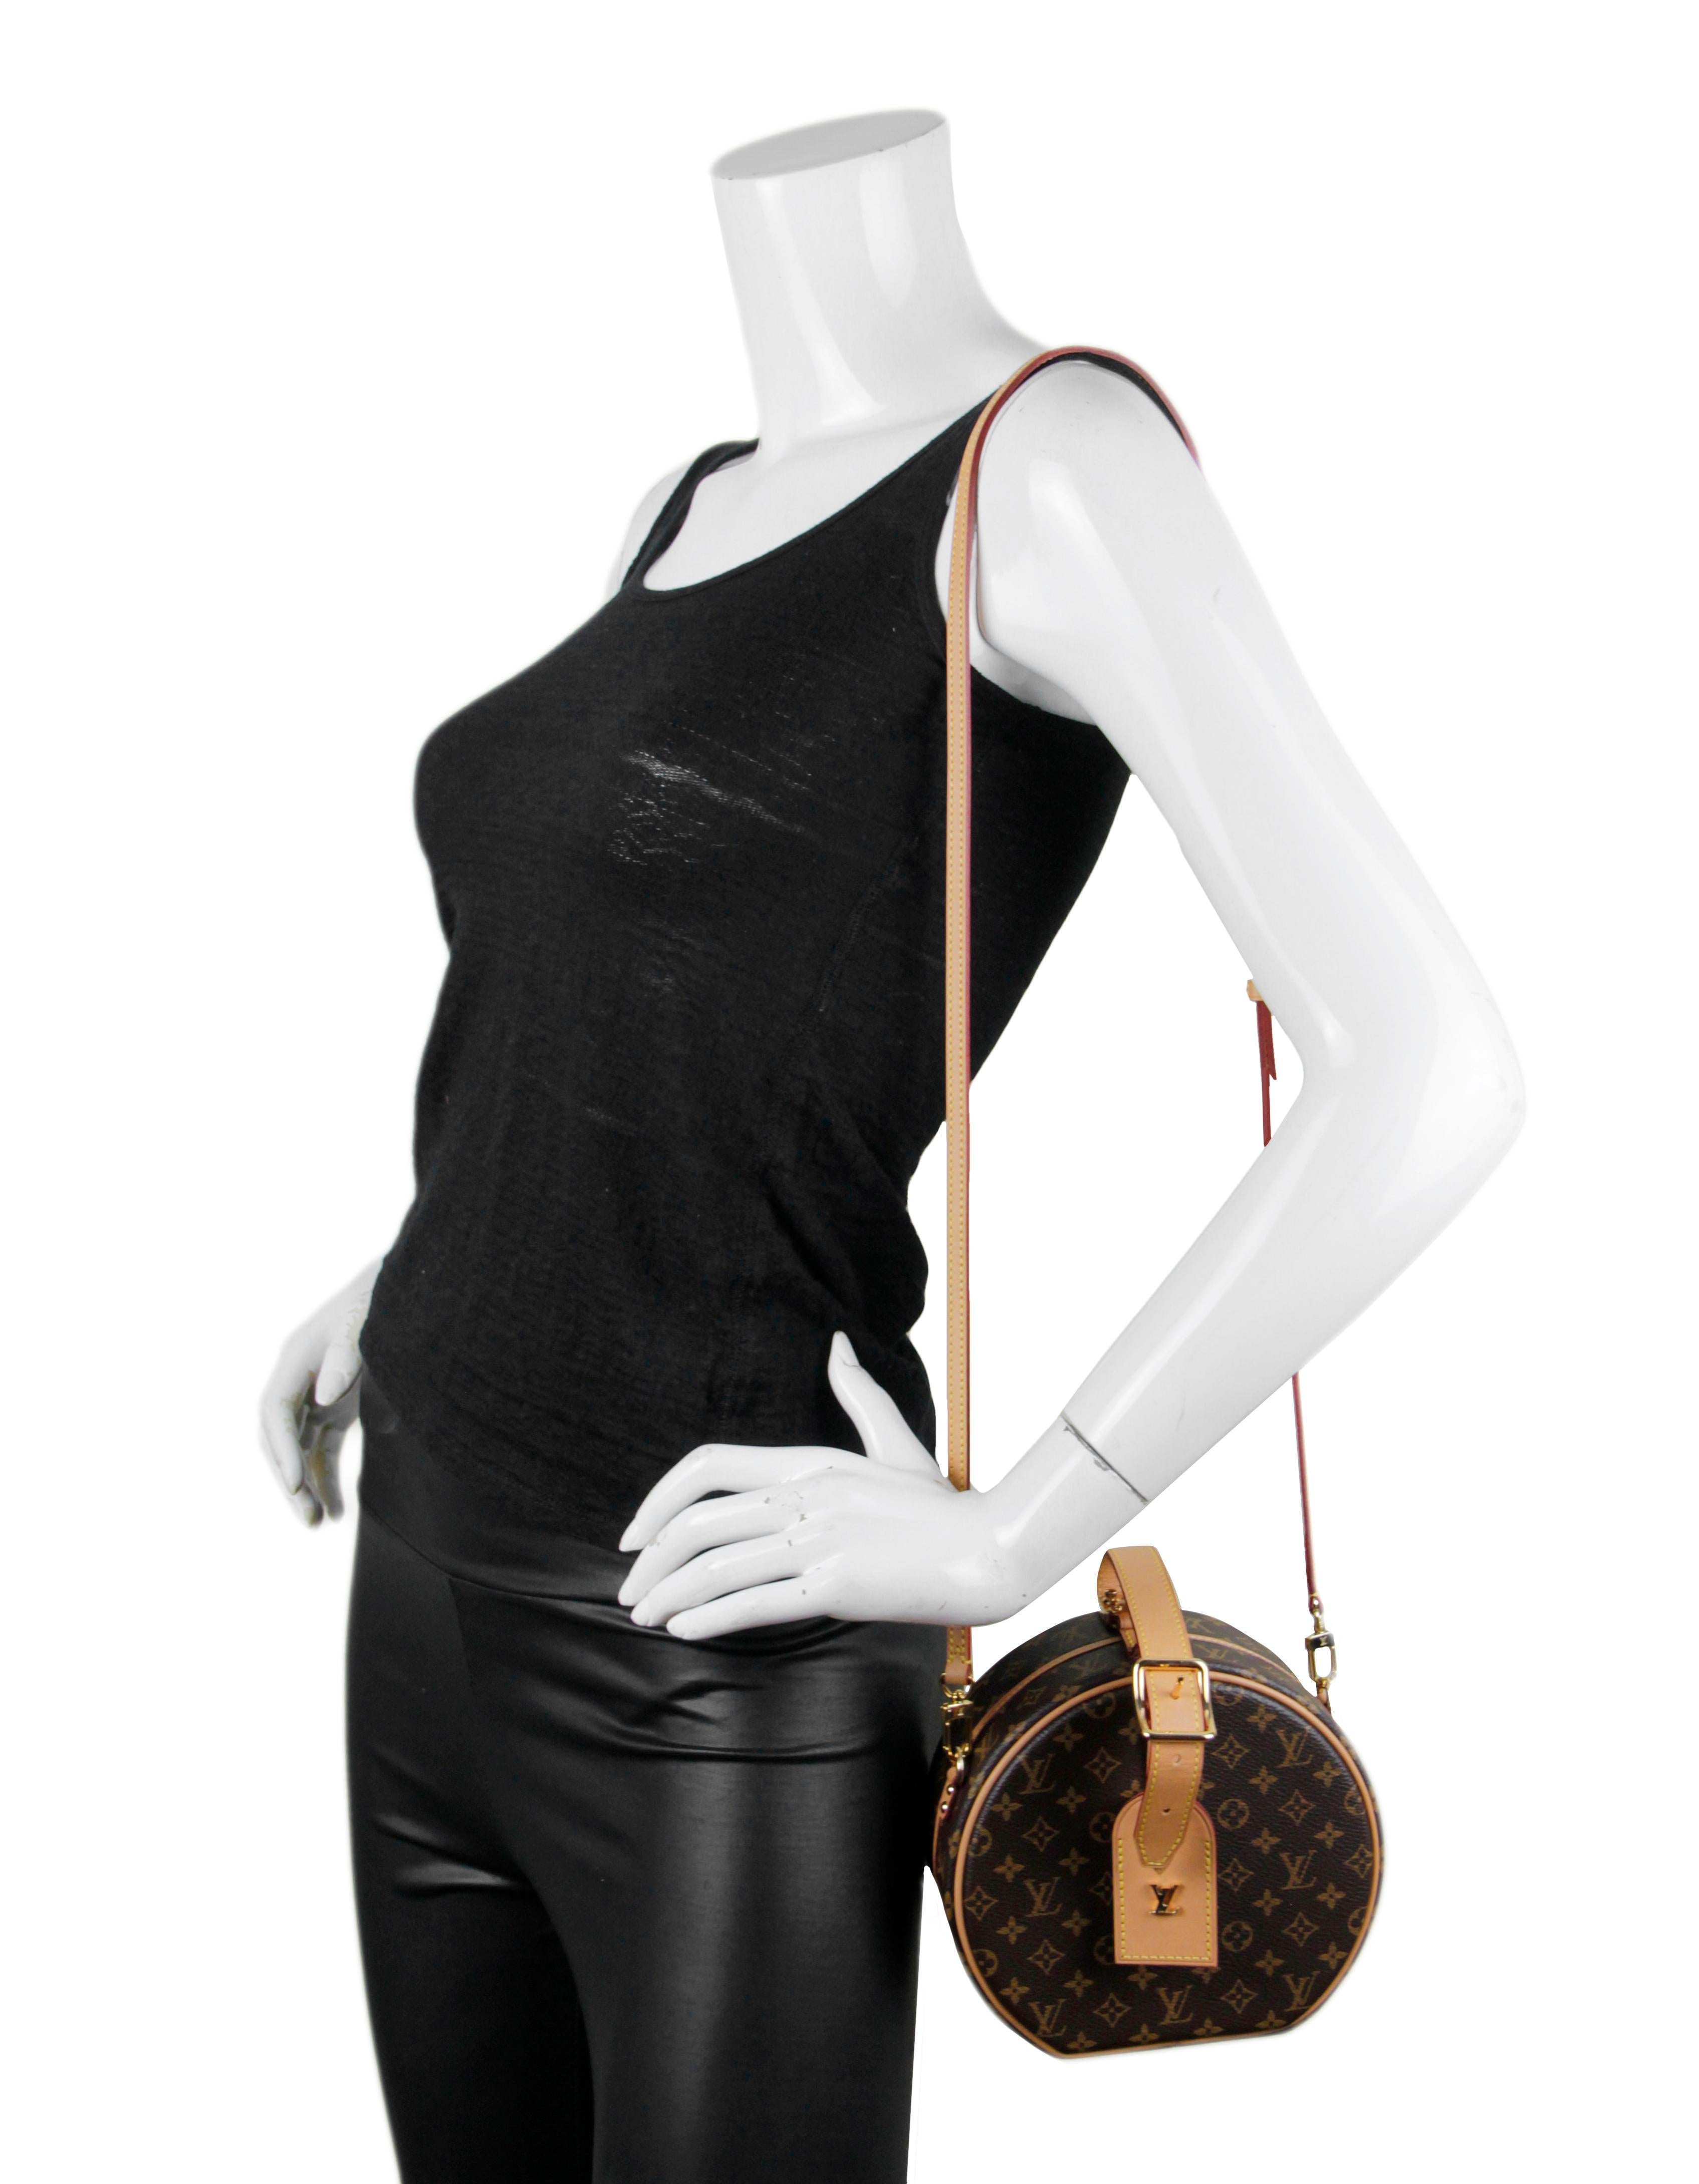 Louis Vuitton Monogram Petite Boite Chapeau Crossbody Bag

Made In: France
Color: Brown
Hardware: Goldtone
Materials: Coated canvas with vachetta leather
Lining: Beige leather
Closure/Opening: Magnetic snap closure with goldtone S lock